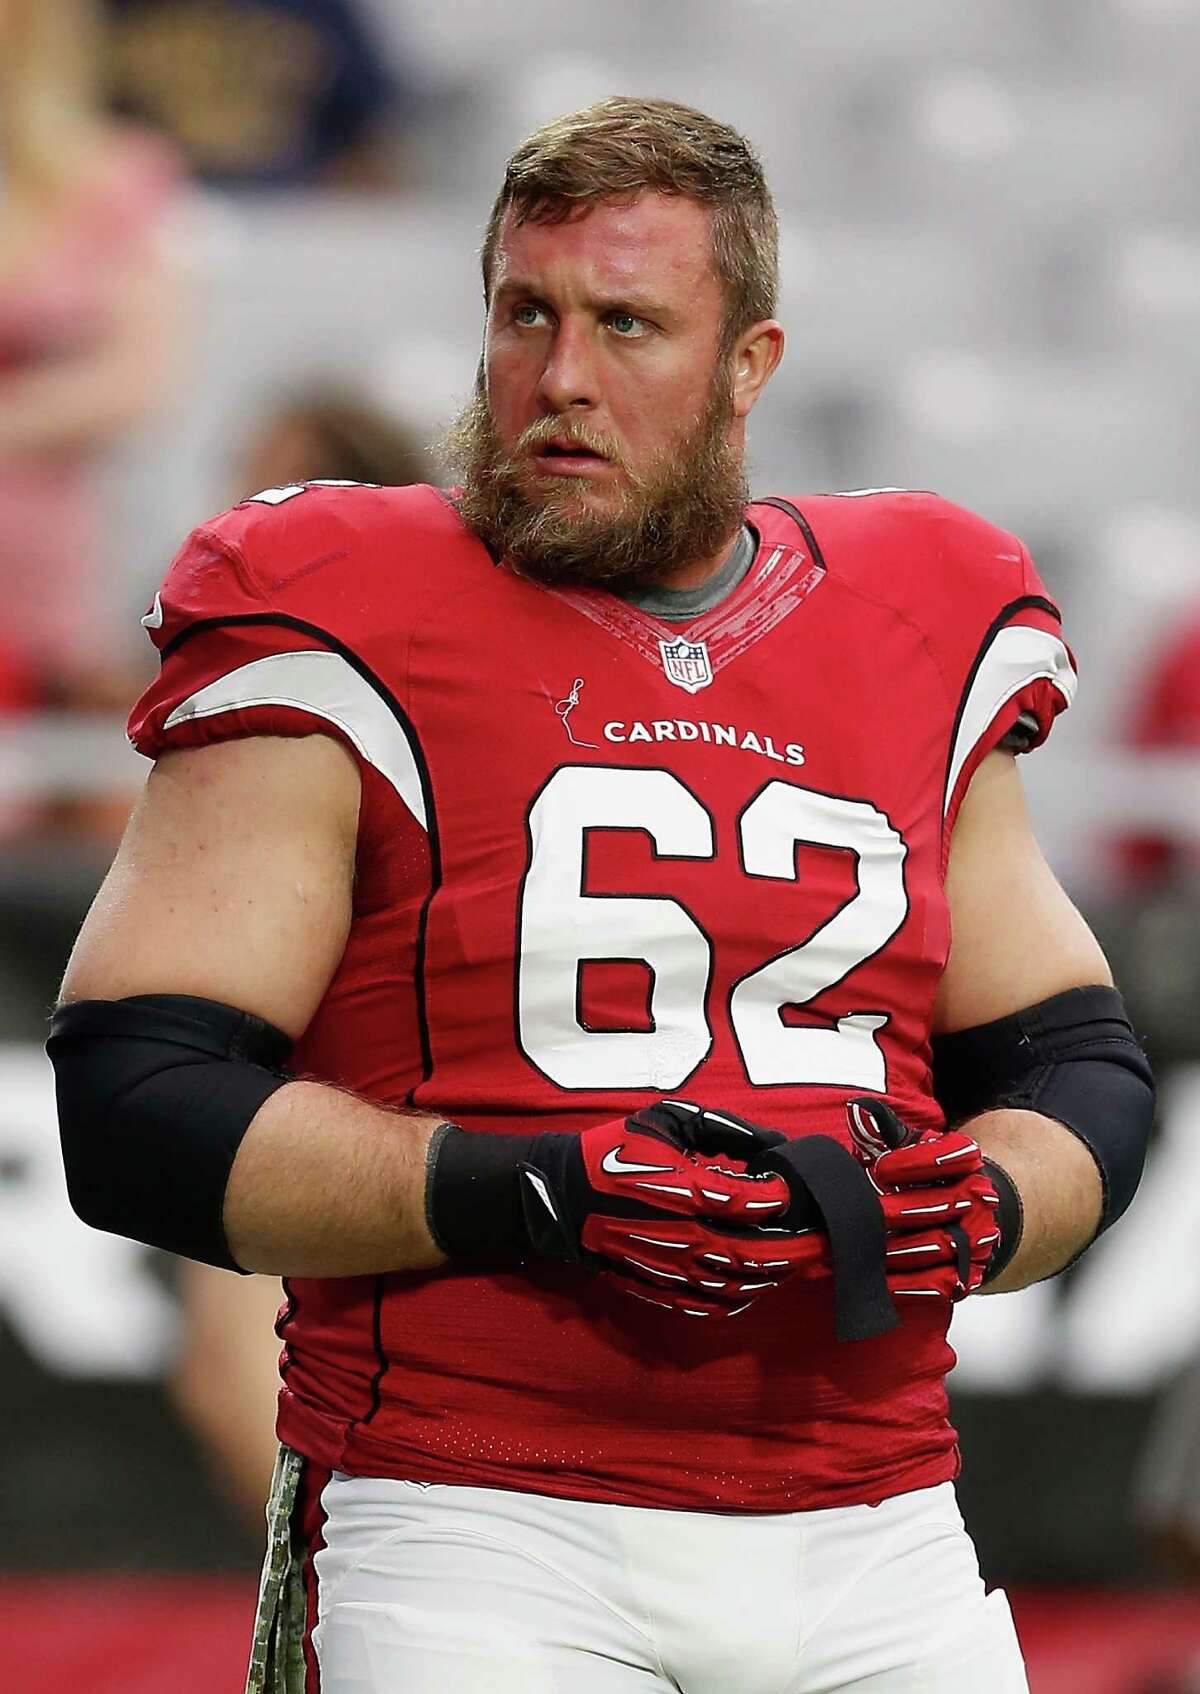 Guard Ted Larsen of the Arizona Cardinals warms up before the NFL game against the St. Louis Rams at the University of Phoenix Stadium on November 9, 2014 in Glendale, Arizona.